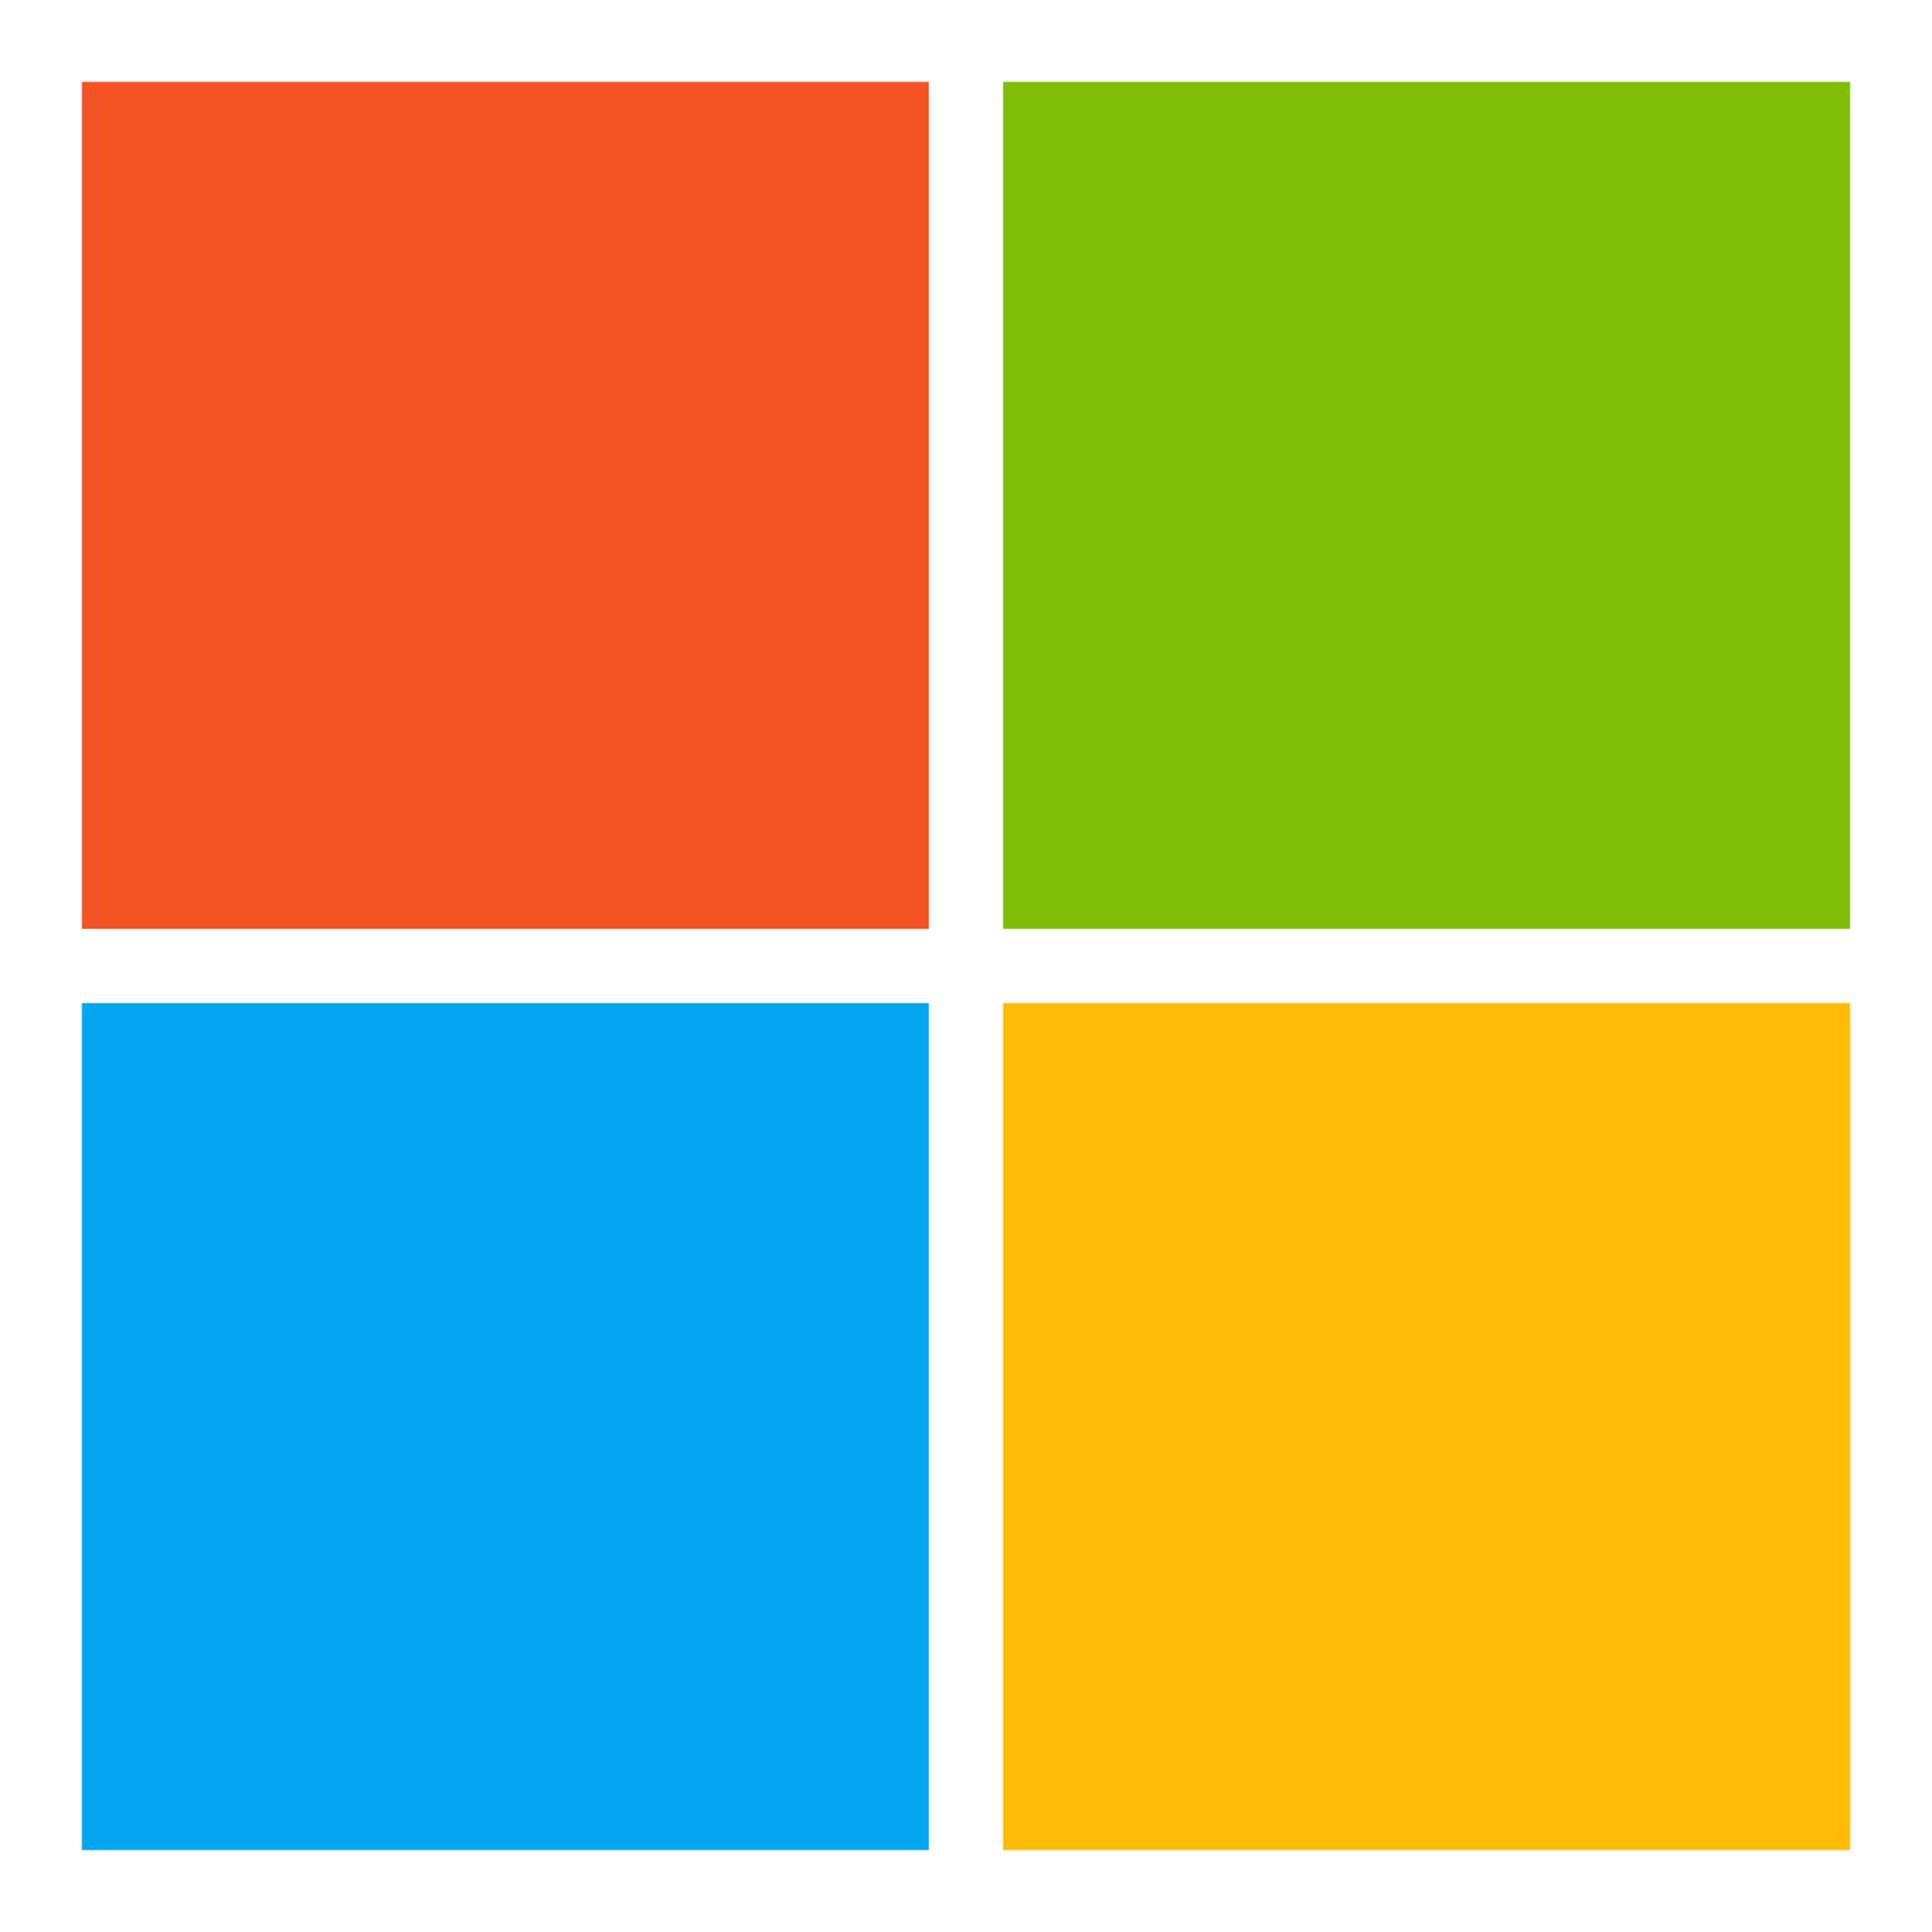 Square window with four coloured blocks in each pane. Top right is green, top left is red, bottom left is blue and bottom right is yellow